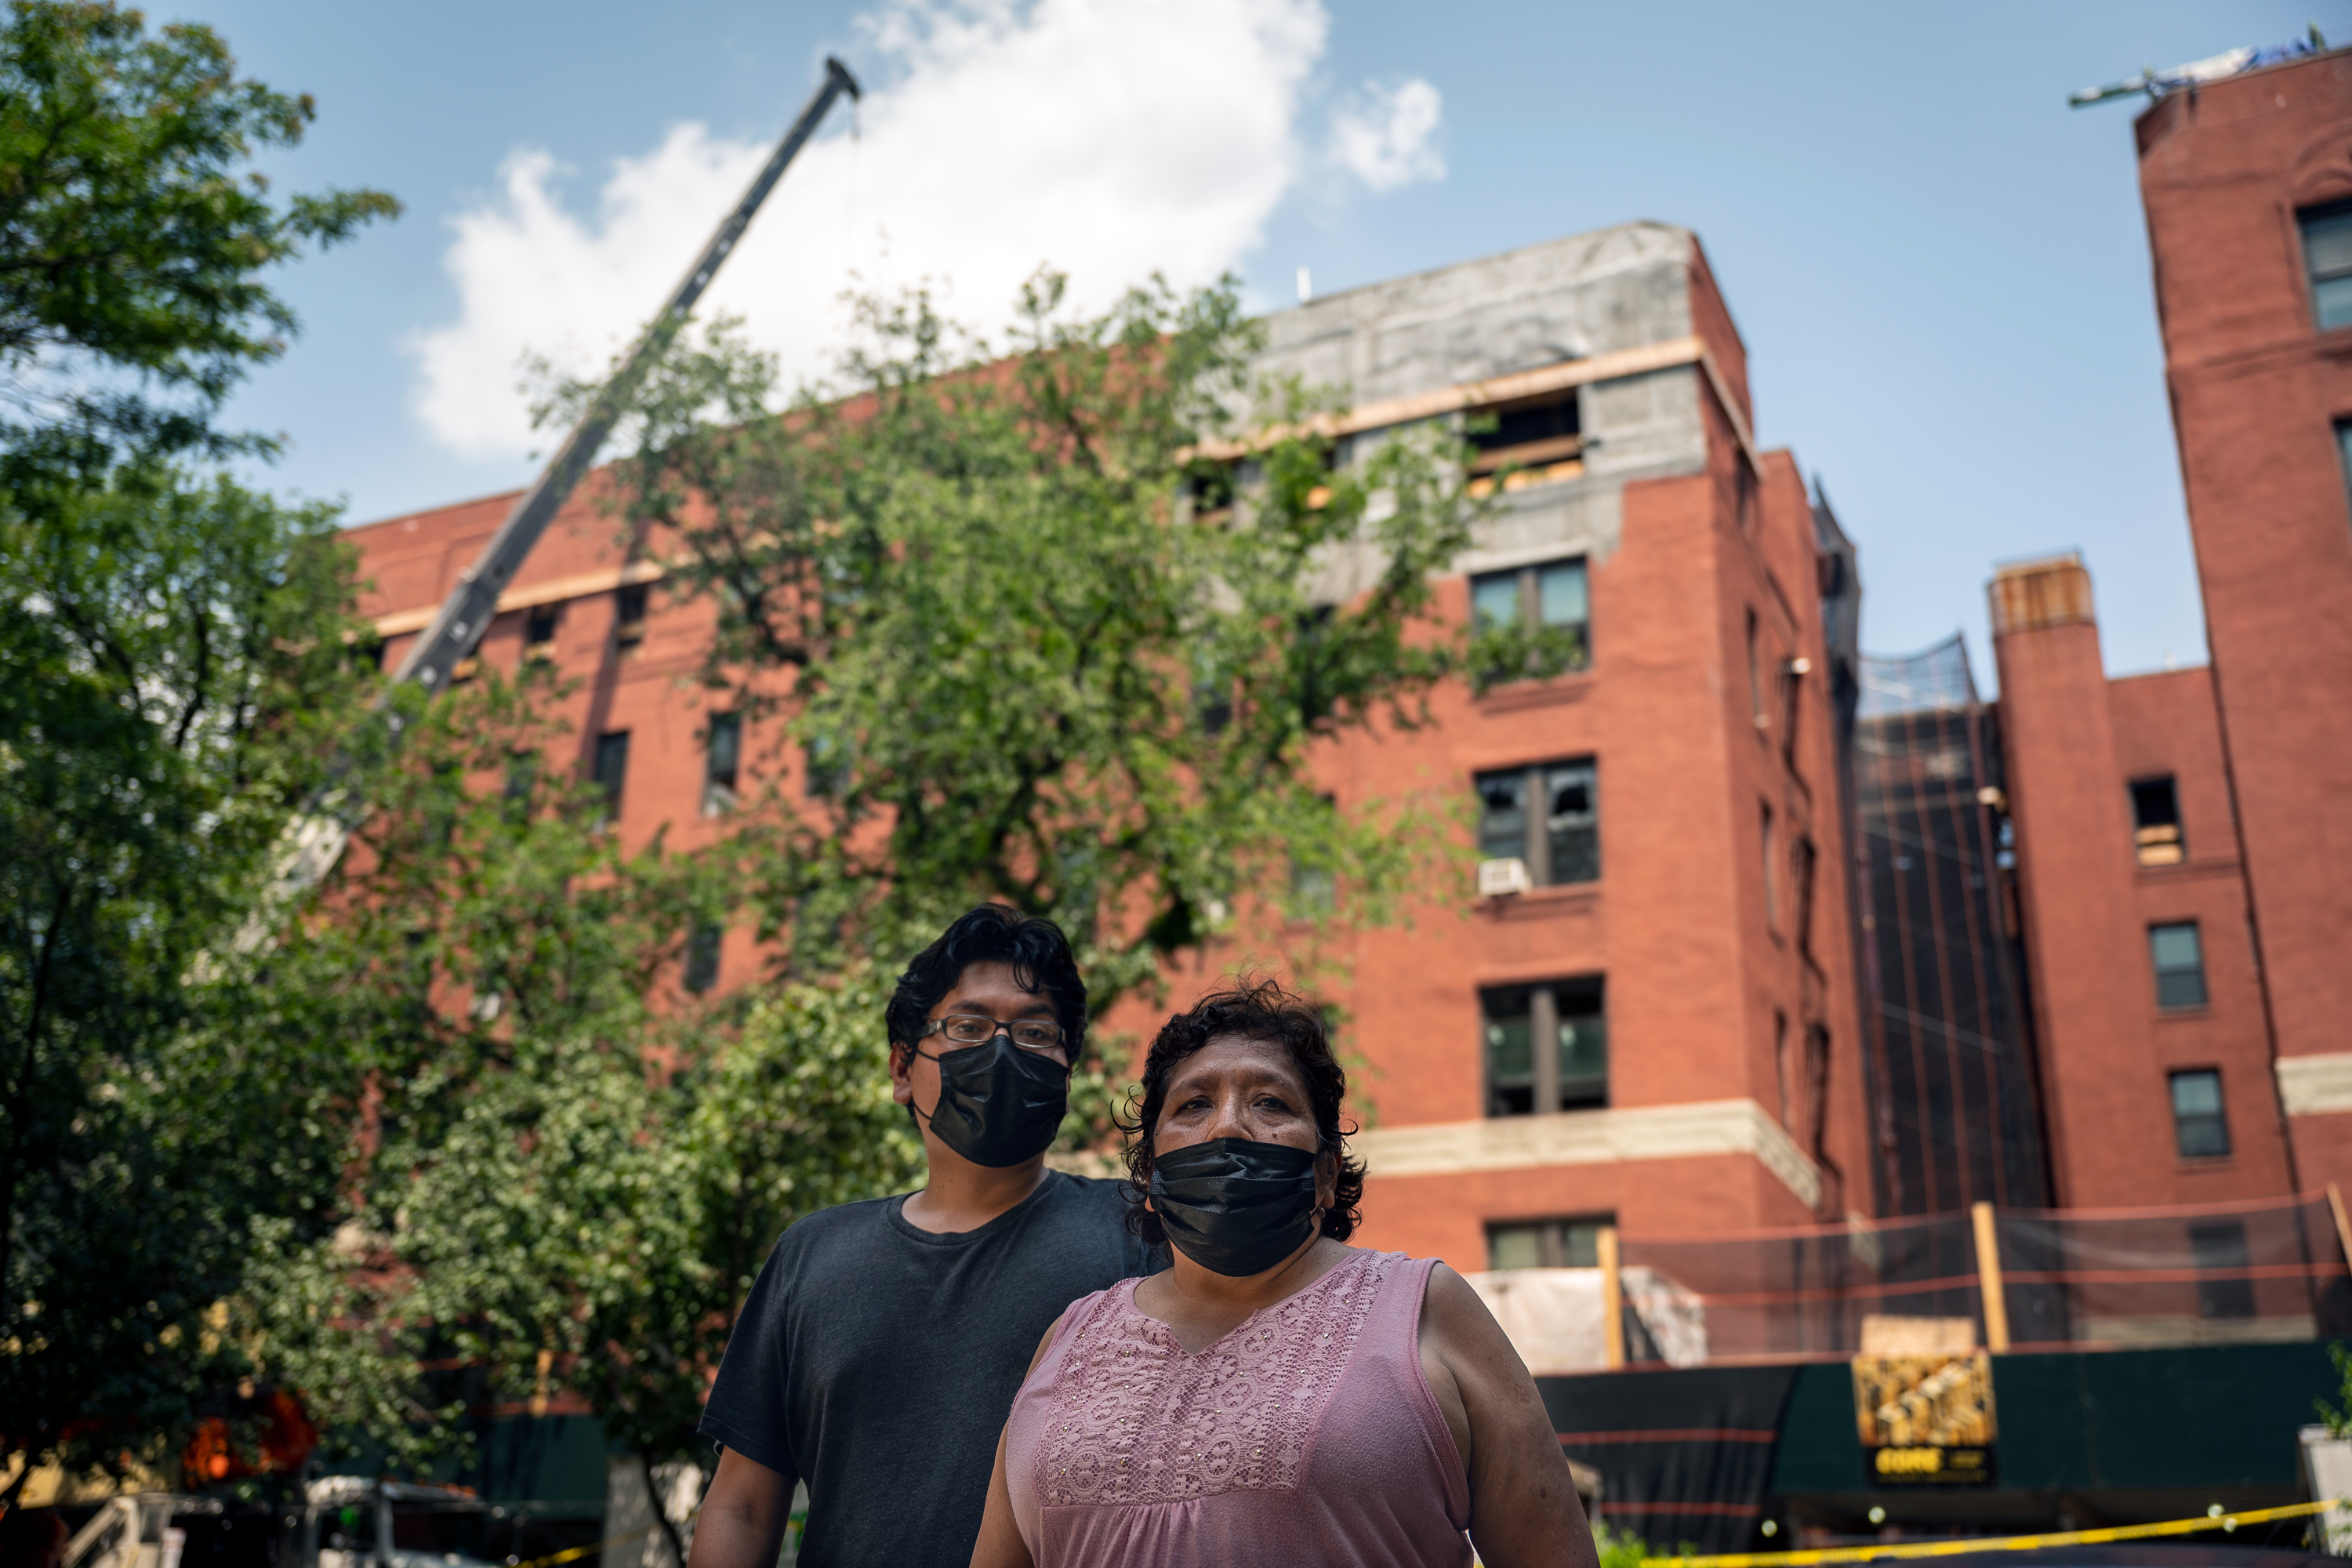 Stephen Hernandez, 28, and his mother Ofelia Orea, 63, lost their Jackson Heights home of over 20 years after a fire badly damaged their building.